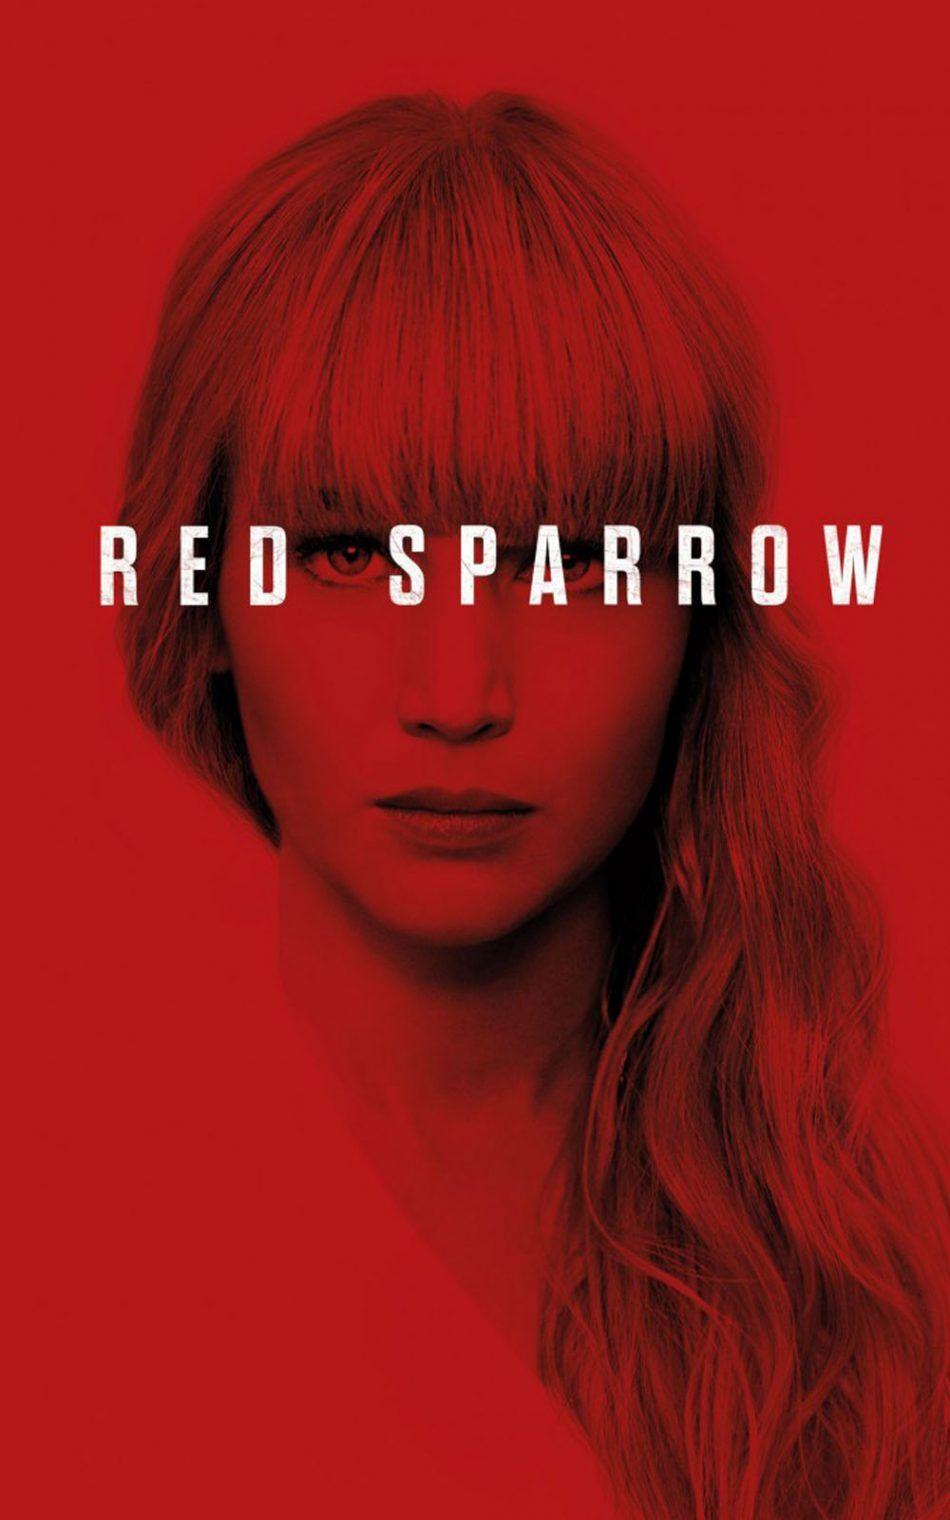 Jennifer Lawrence In Red Sparrow Free 100% Pure HD